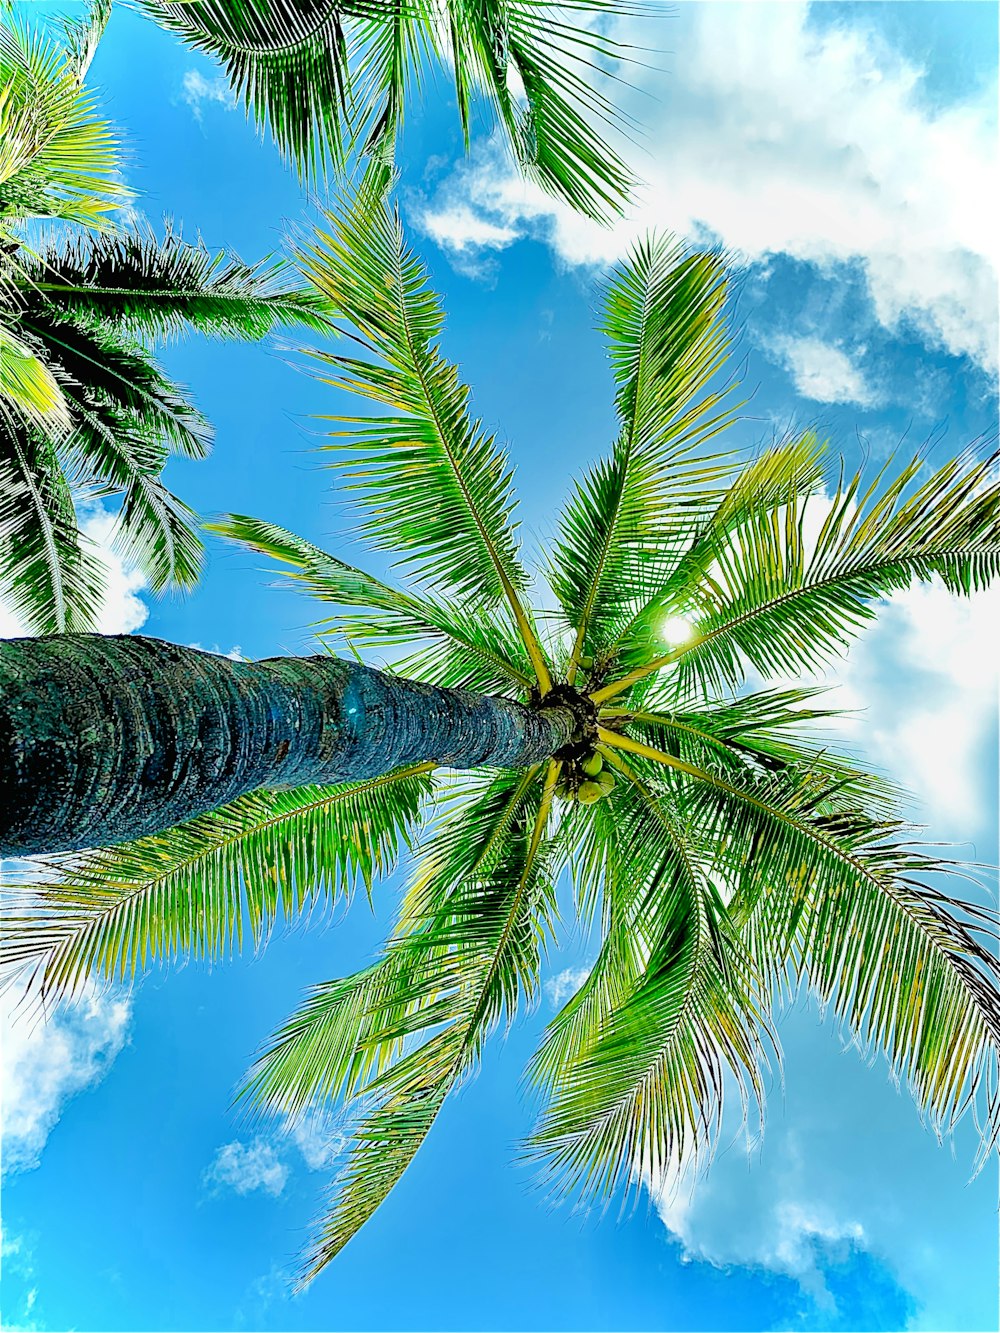 low-angle photography of green coconut trees under blue and white sky during daytime